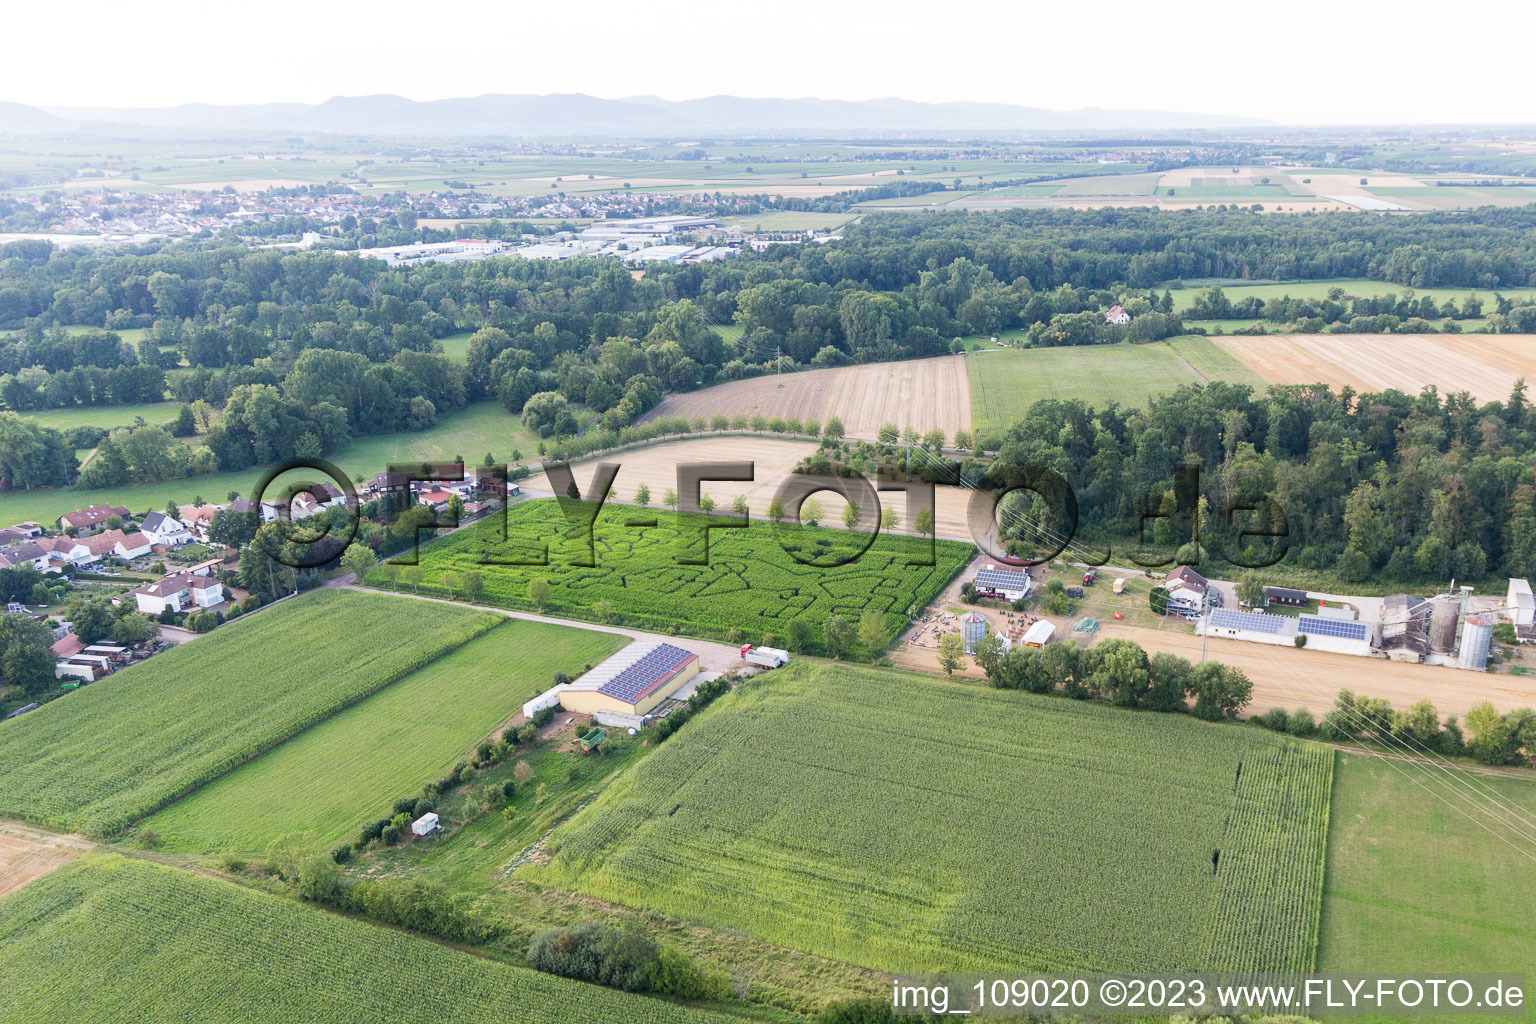 Aerial view of Corn maze at Seehof in Steinweiler in the state Rhineland-Palatinate, Germany